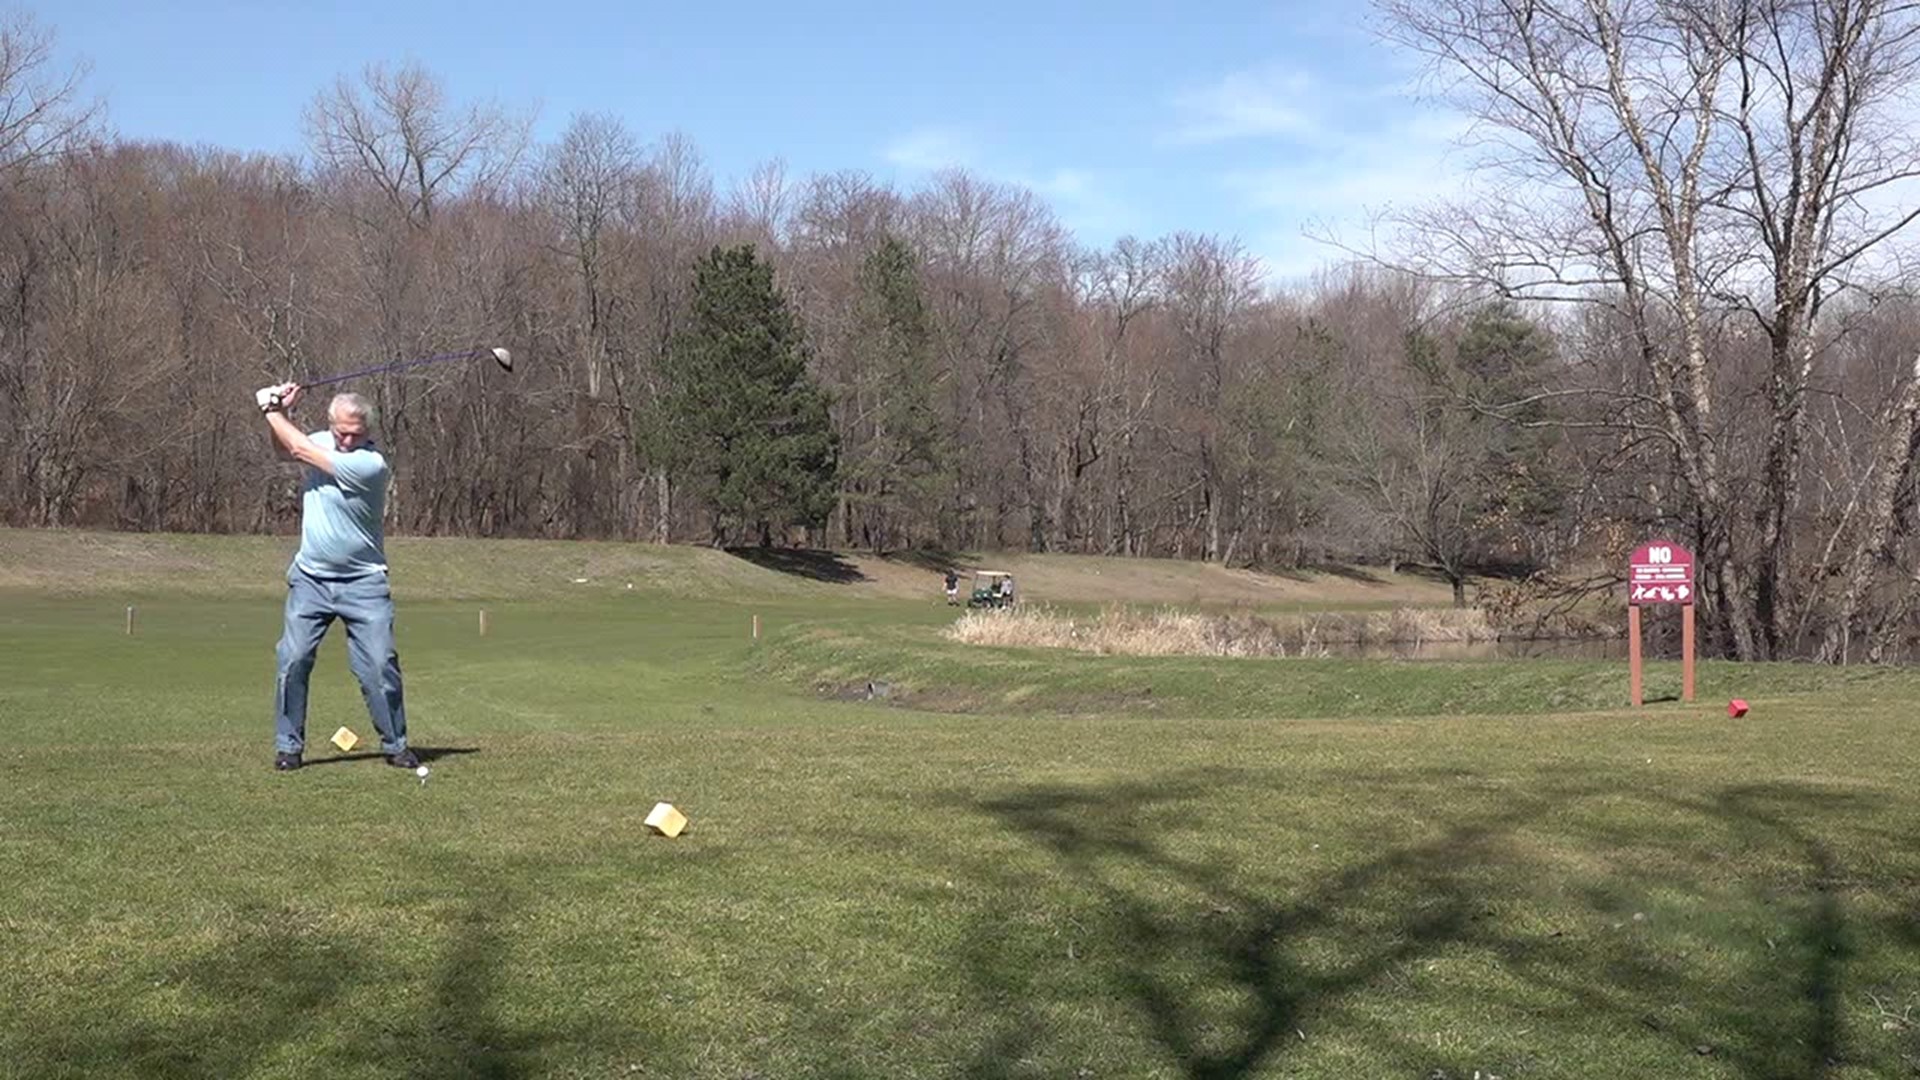 After what some might say felt like a long winter. People in Luzerne County are making sure to take advantage of the sunshine and warm weather.